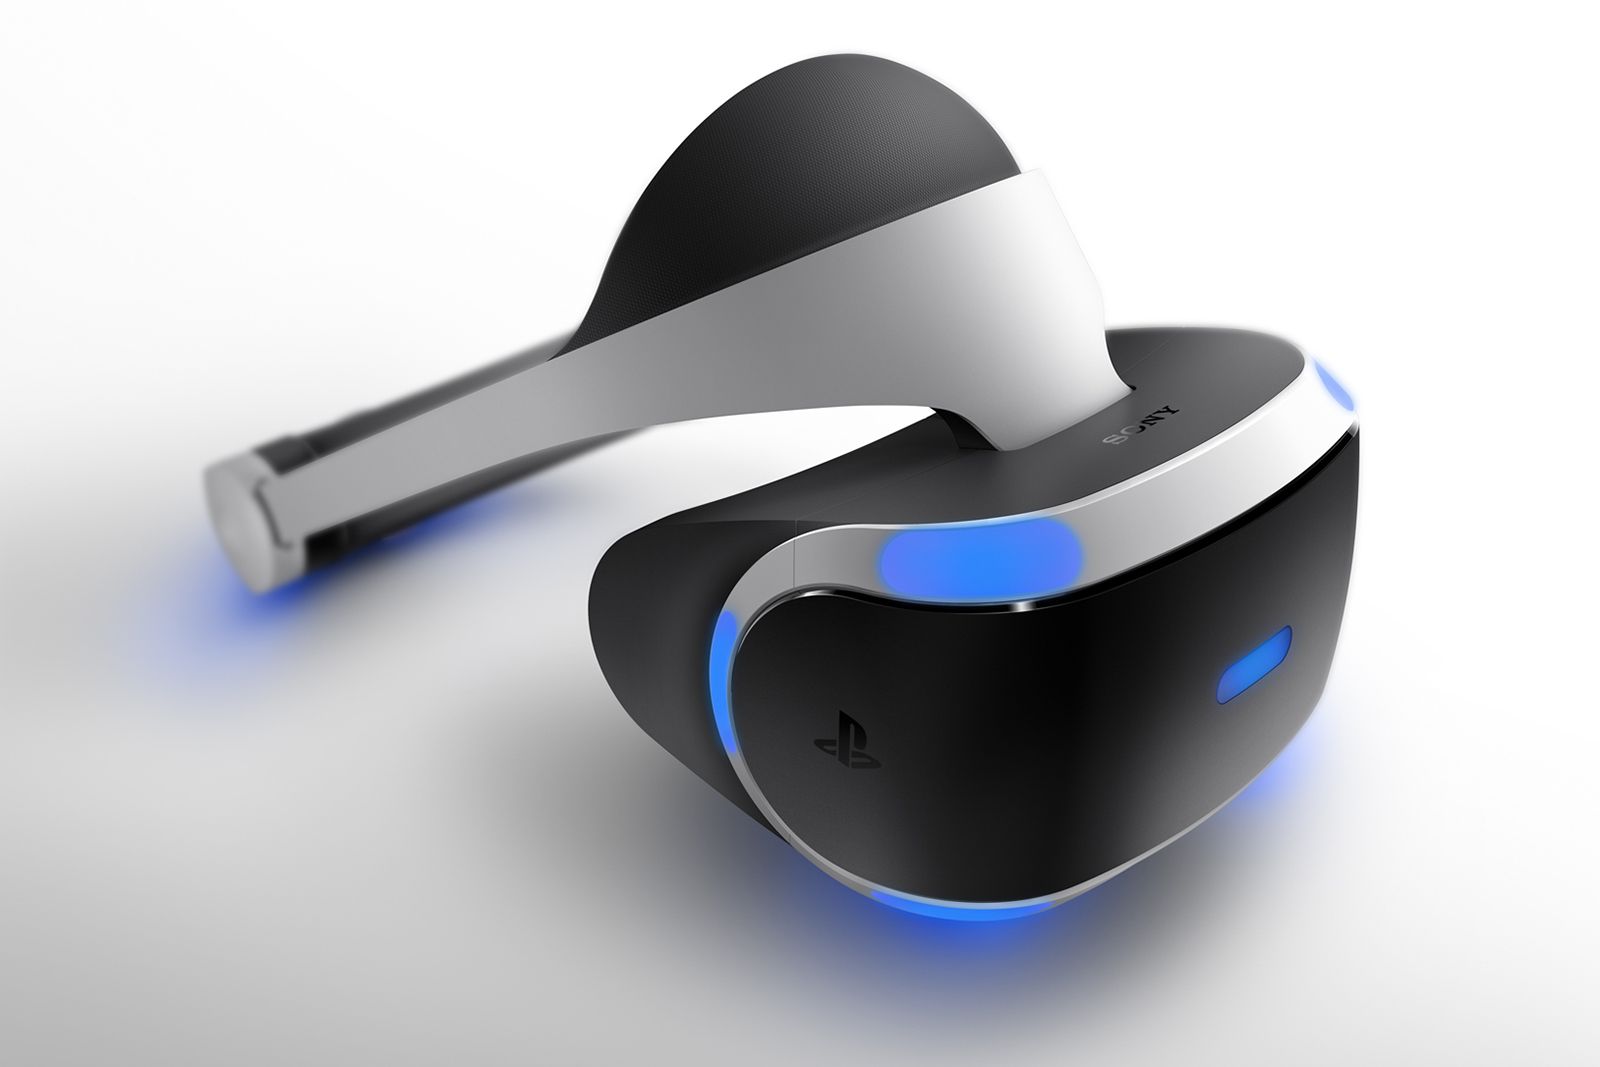 sony playstation vr bundle is a hit sells out in just minutes on amazon image 1